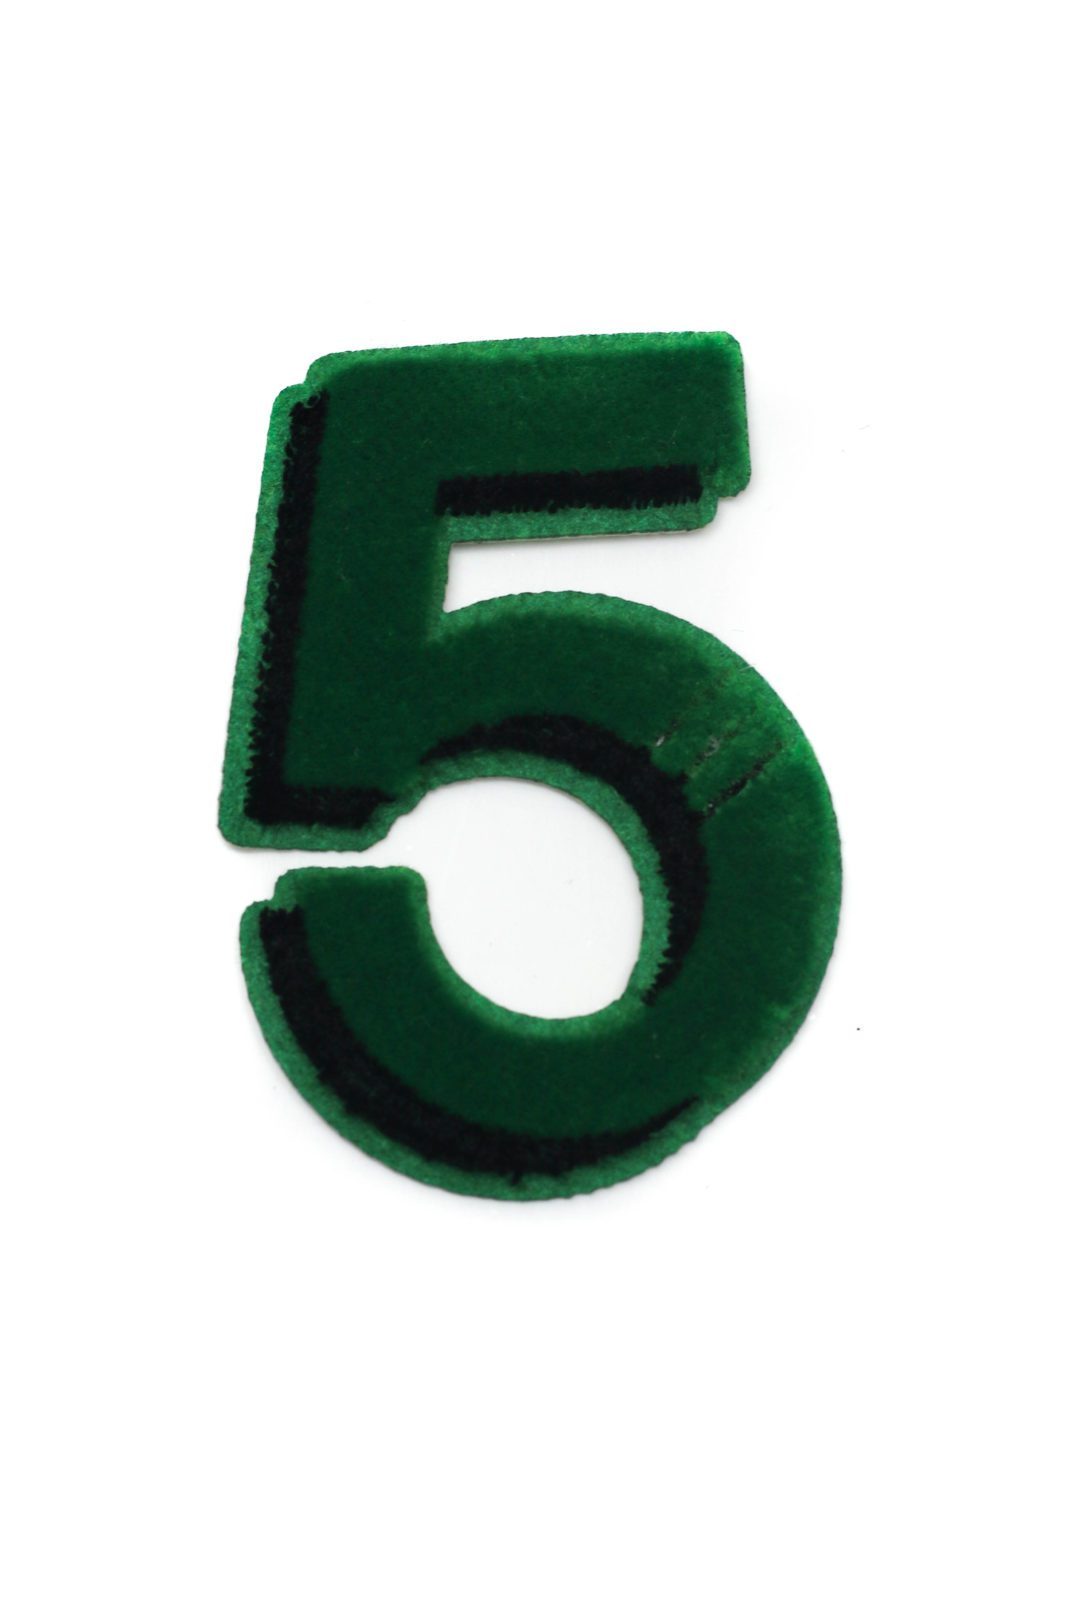 Green number 5 iron on chenille patch